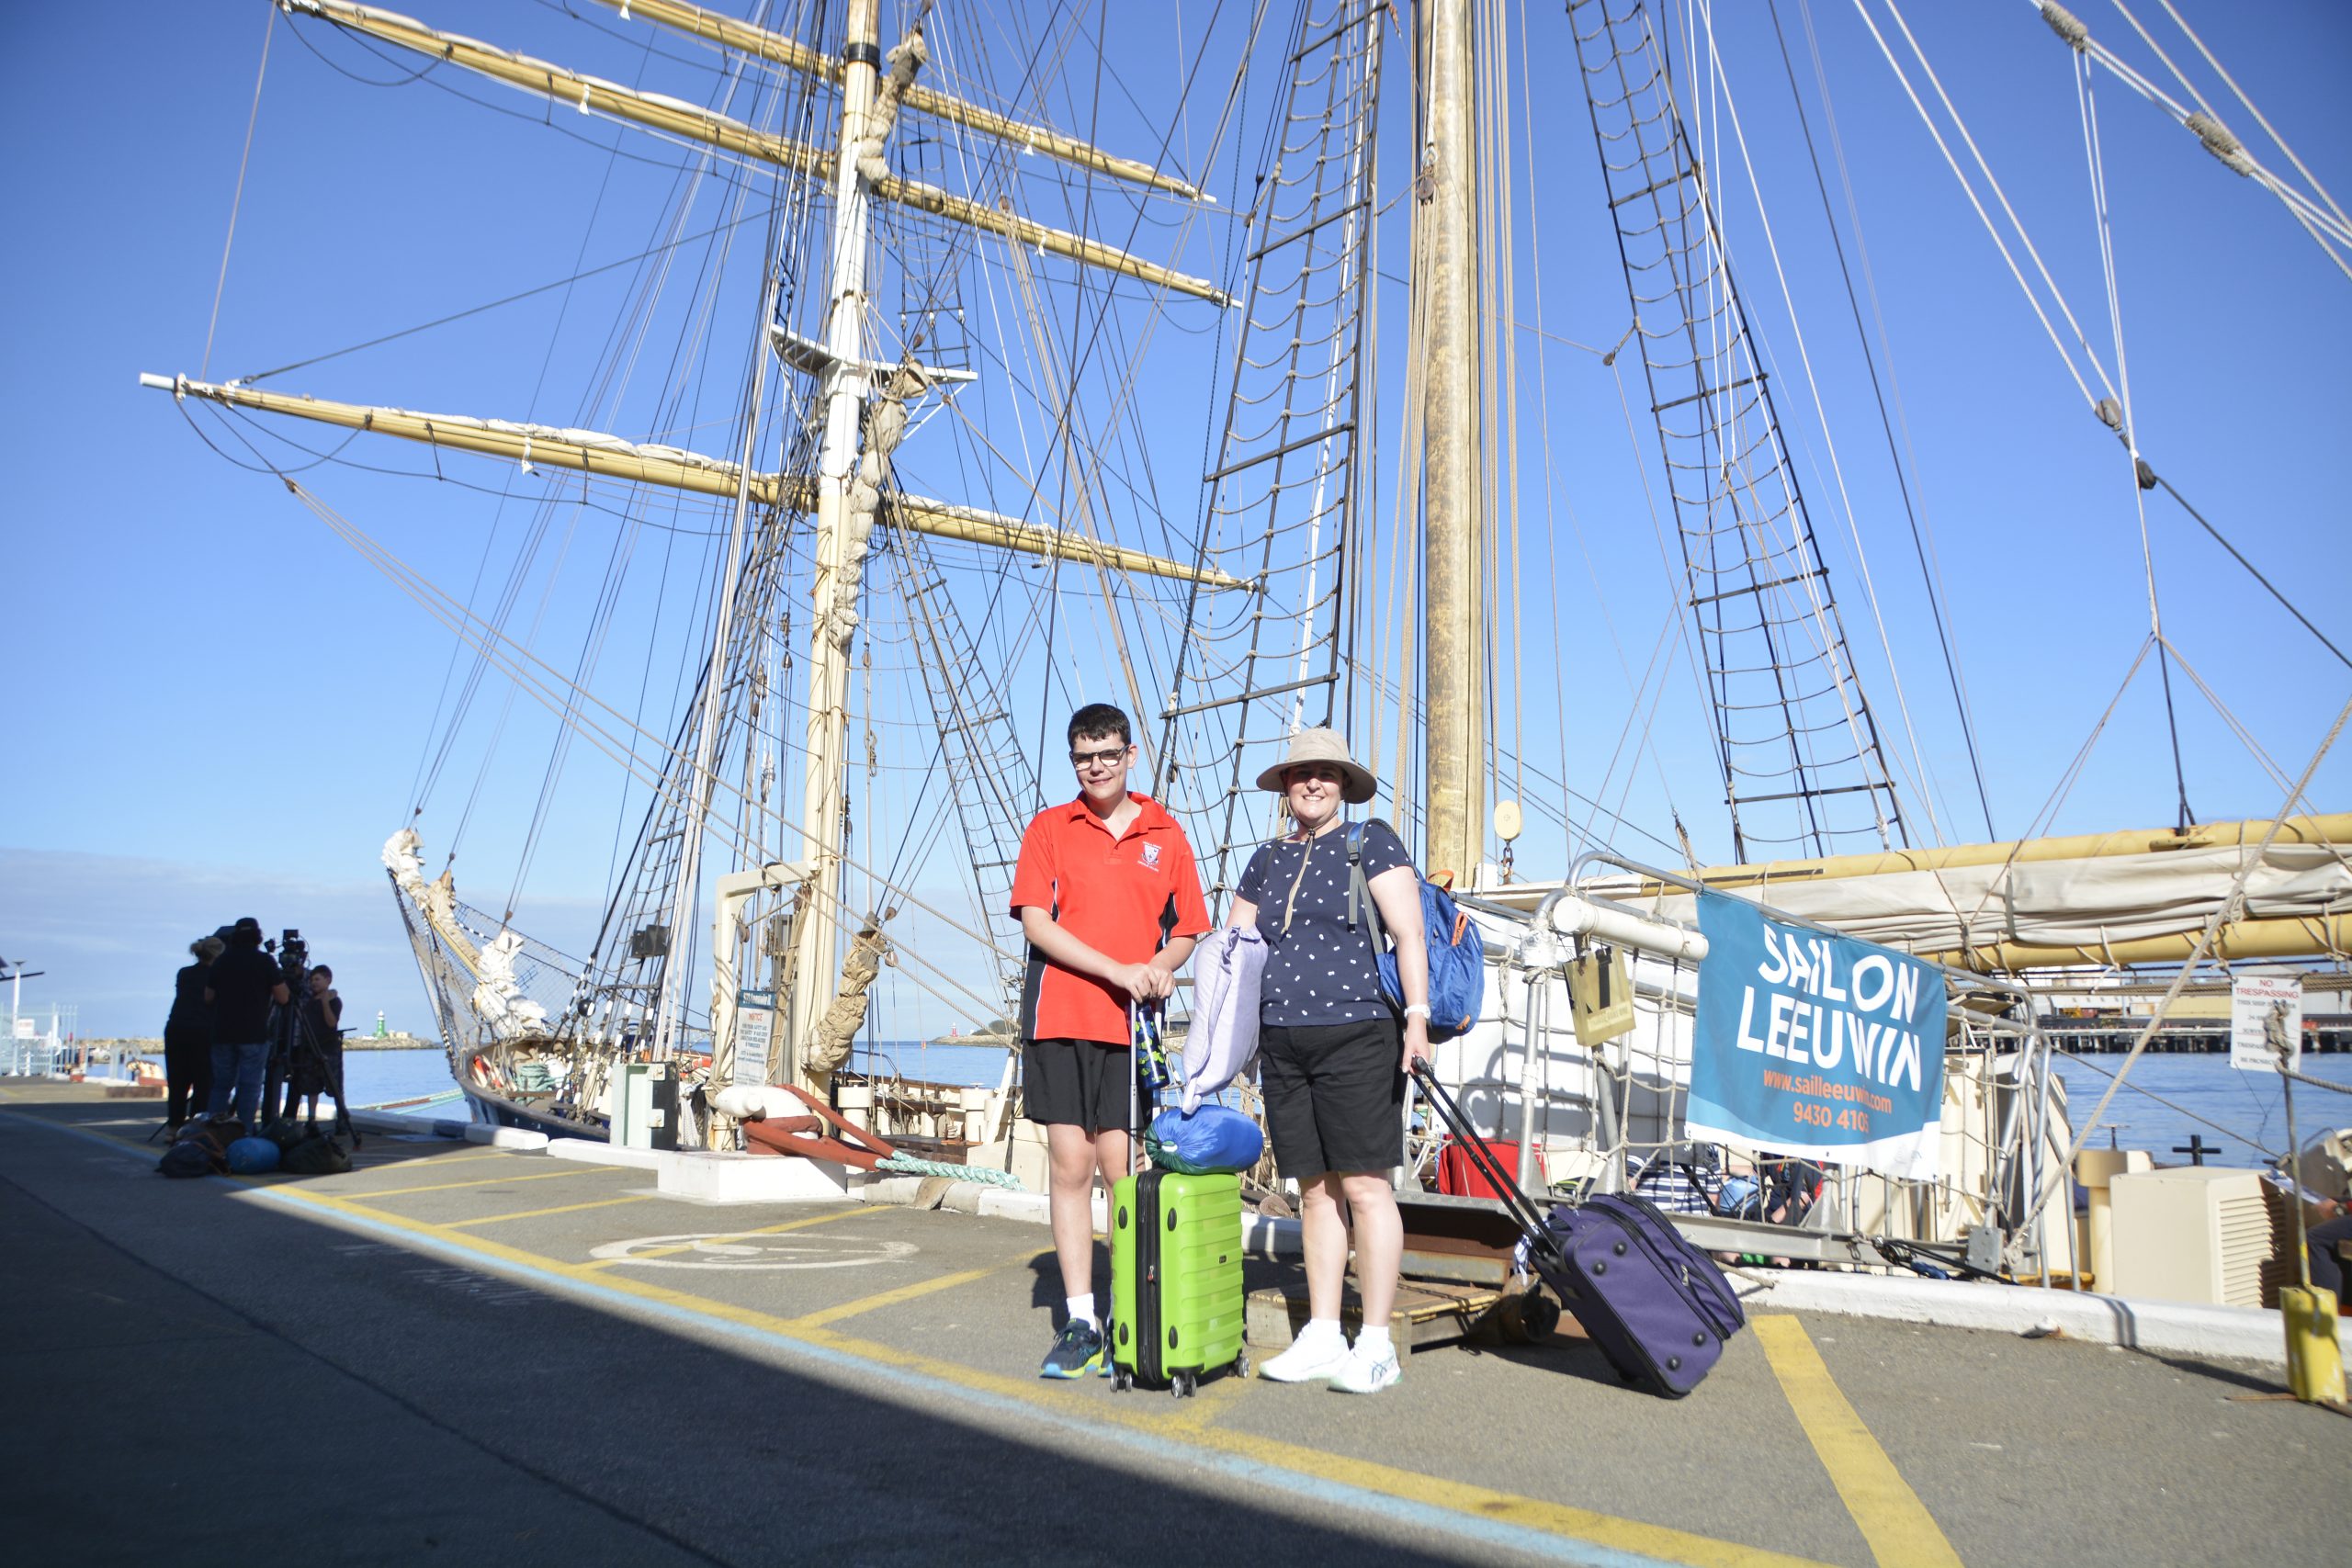 Daniel and Julie-Anne stand in front of the Leeuwin after disembarking with their luggage